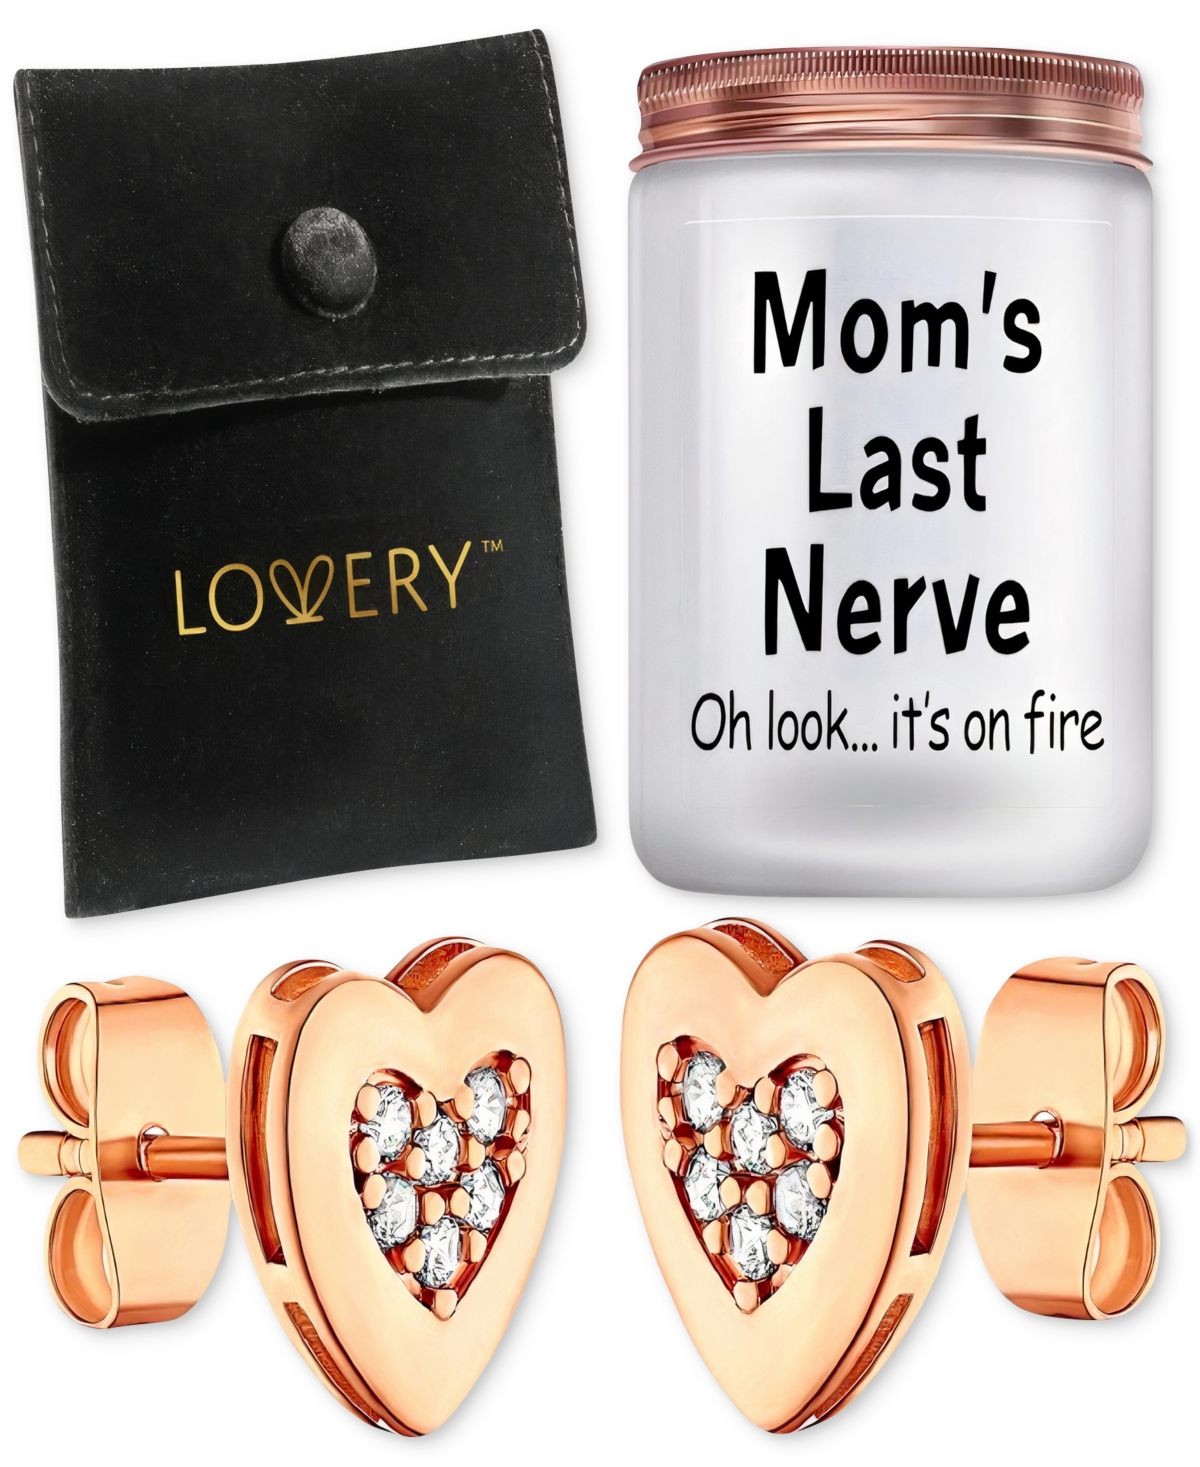 3-Pc. Heart Earrings & "Mom's Last Nerve" Candle Gift Set